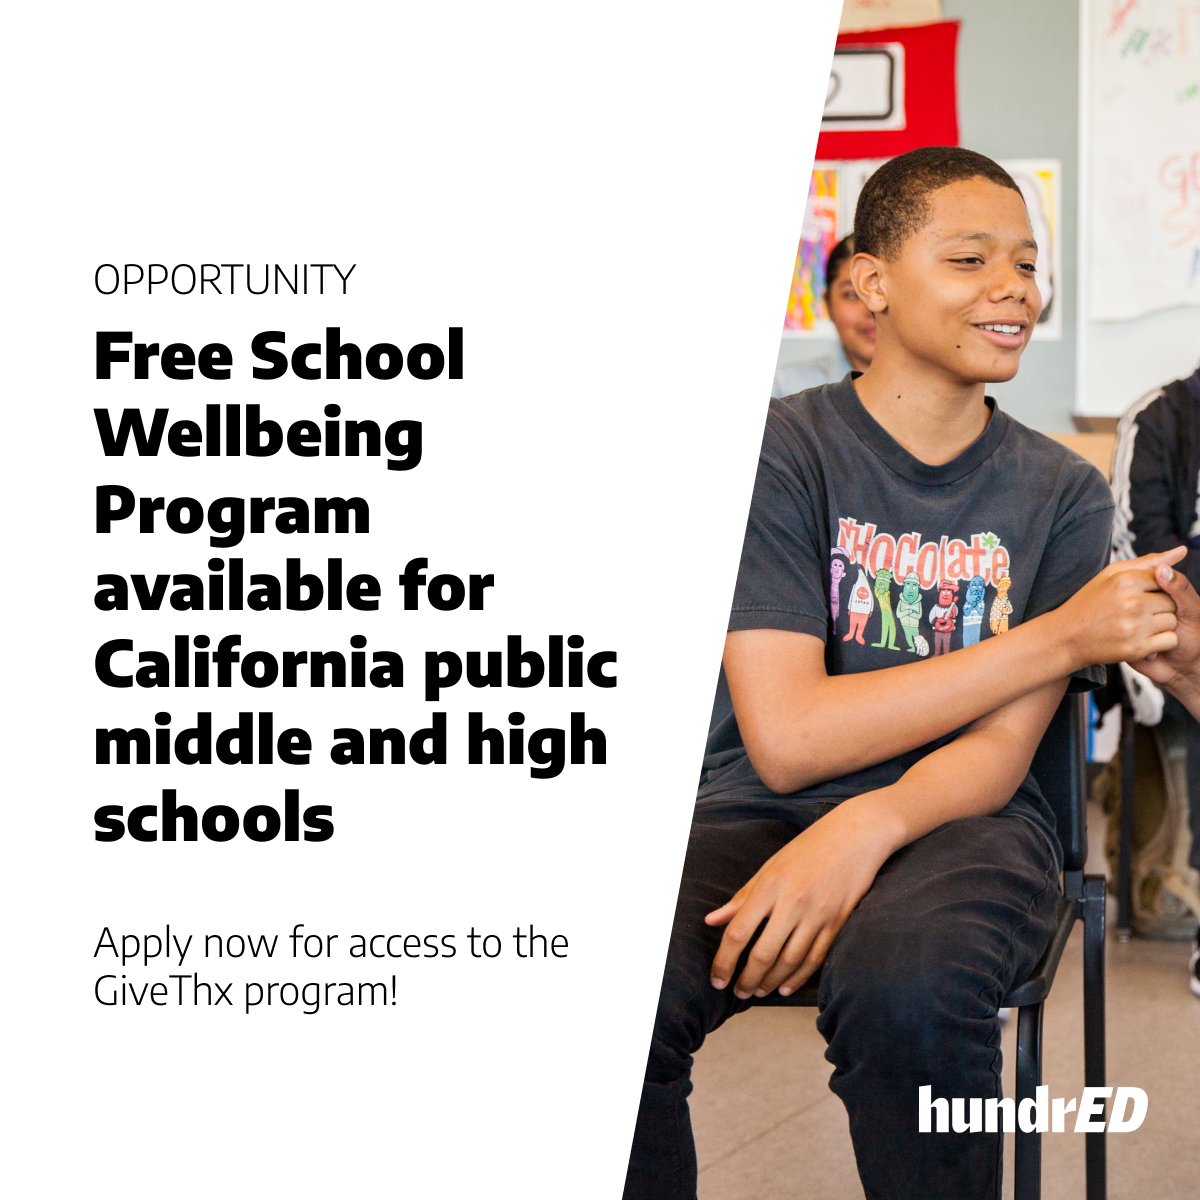 📣 OPPORTUNITY: @givethxapp is looking for public middle and high schools in California who are interested in implementing their School Wellbeing Programme for free. ⚡For more information: loom.ly/rjXDfnc